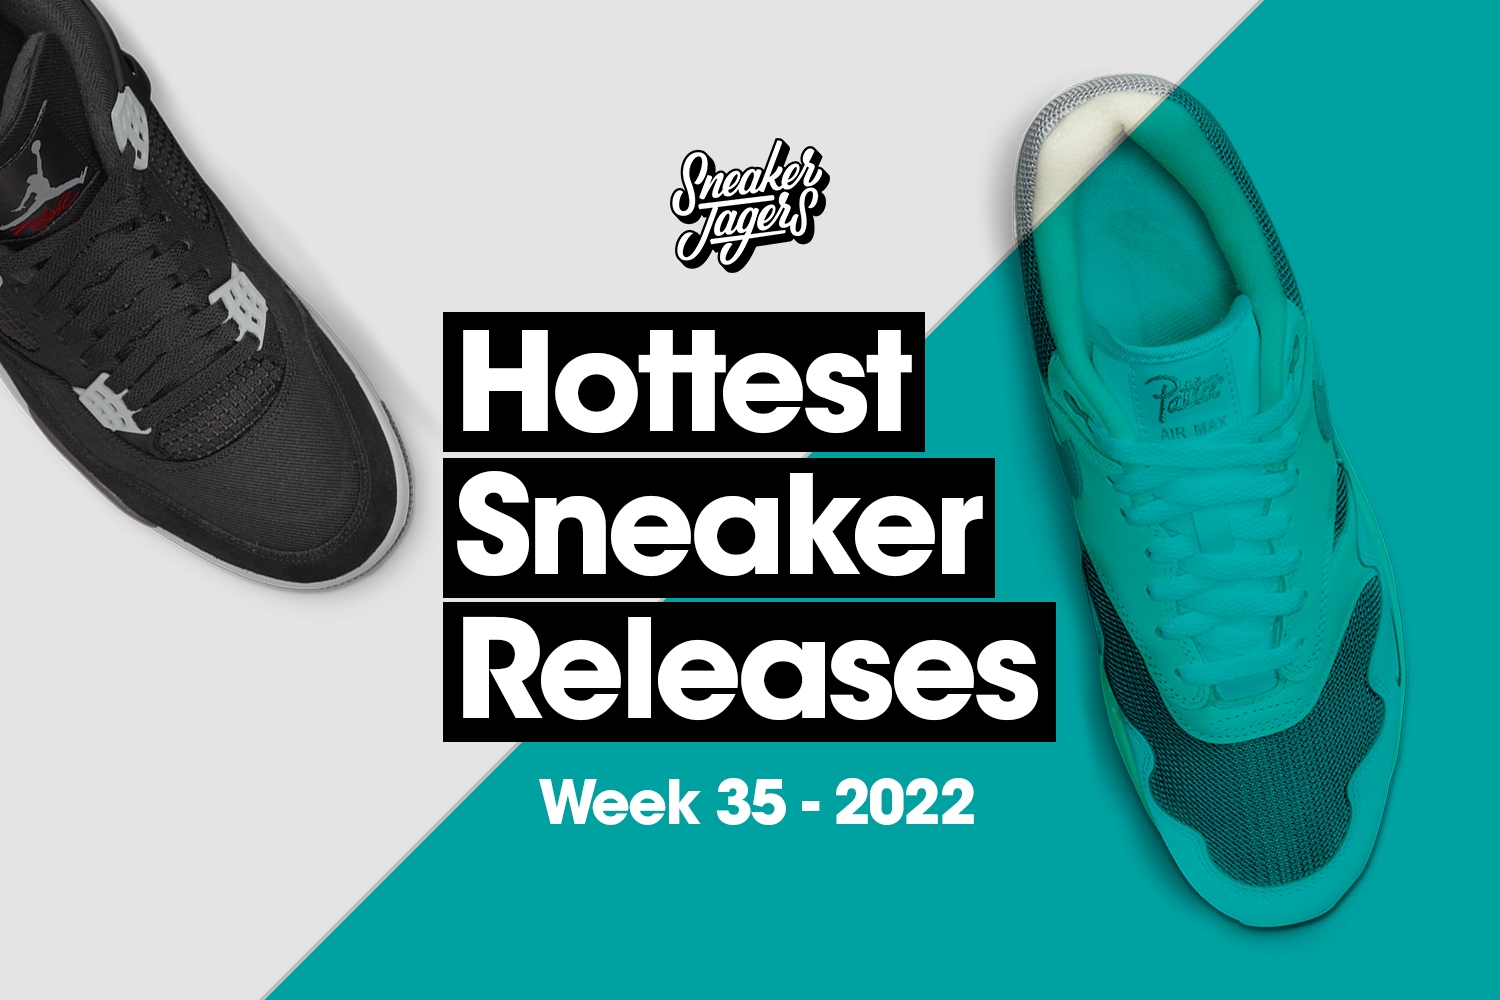 Hottest Sneaker Releases - WK 35